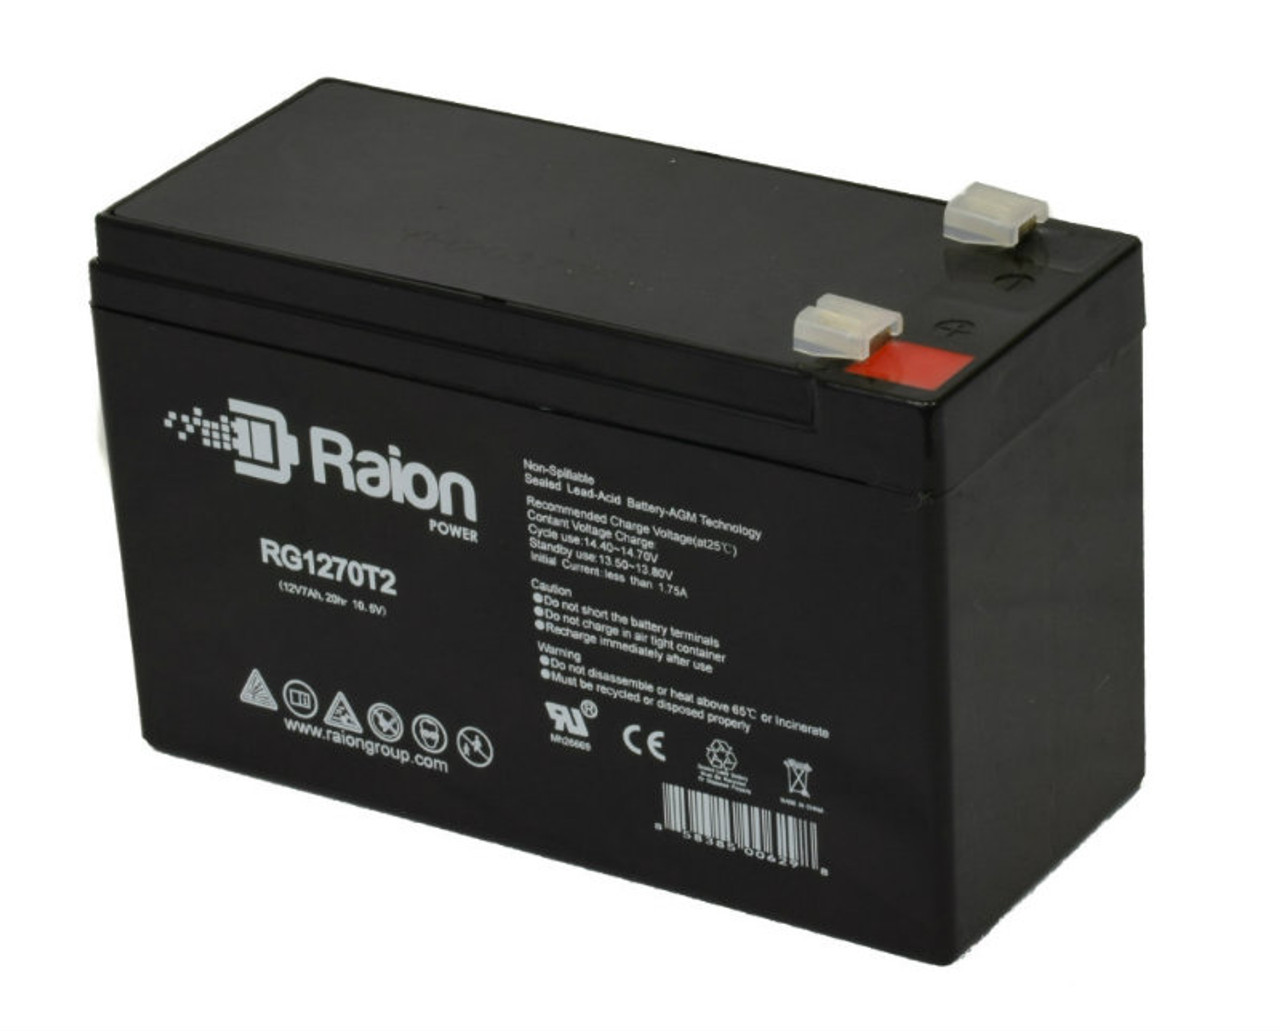 Raion Power RG1270T1 12V 7Ah Non-Spillable Replacement Battery for Yucel Y7-12